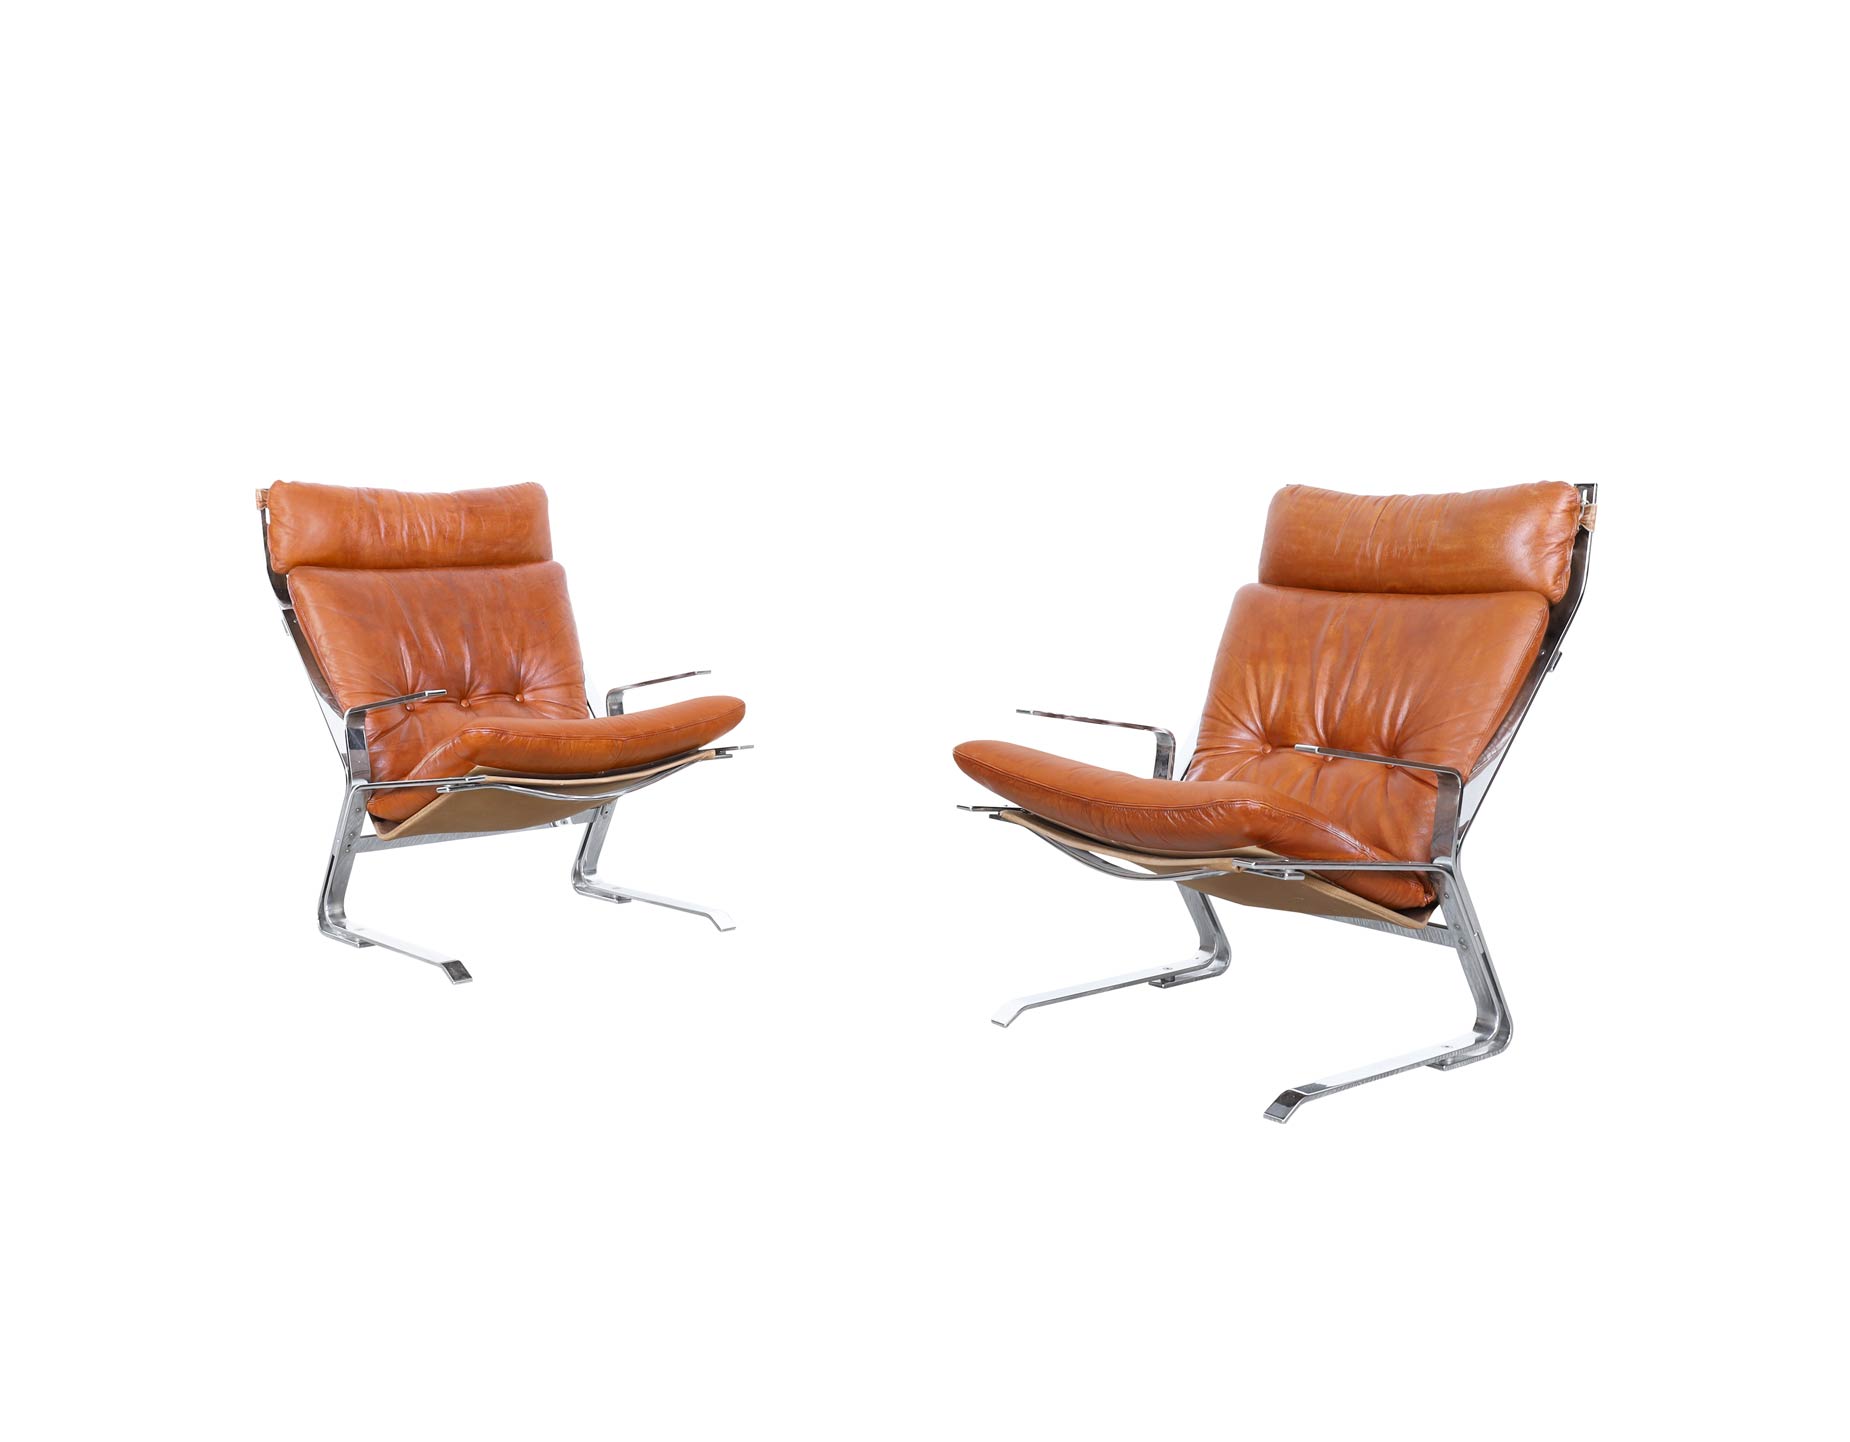 Vintage Leather and Chrome Pirate Lounge Chairs by Elsa and Nordahl Solheim